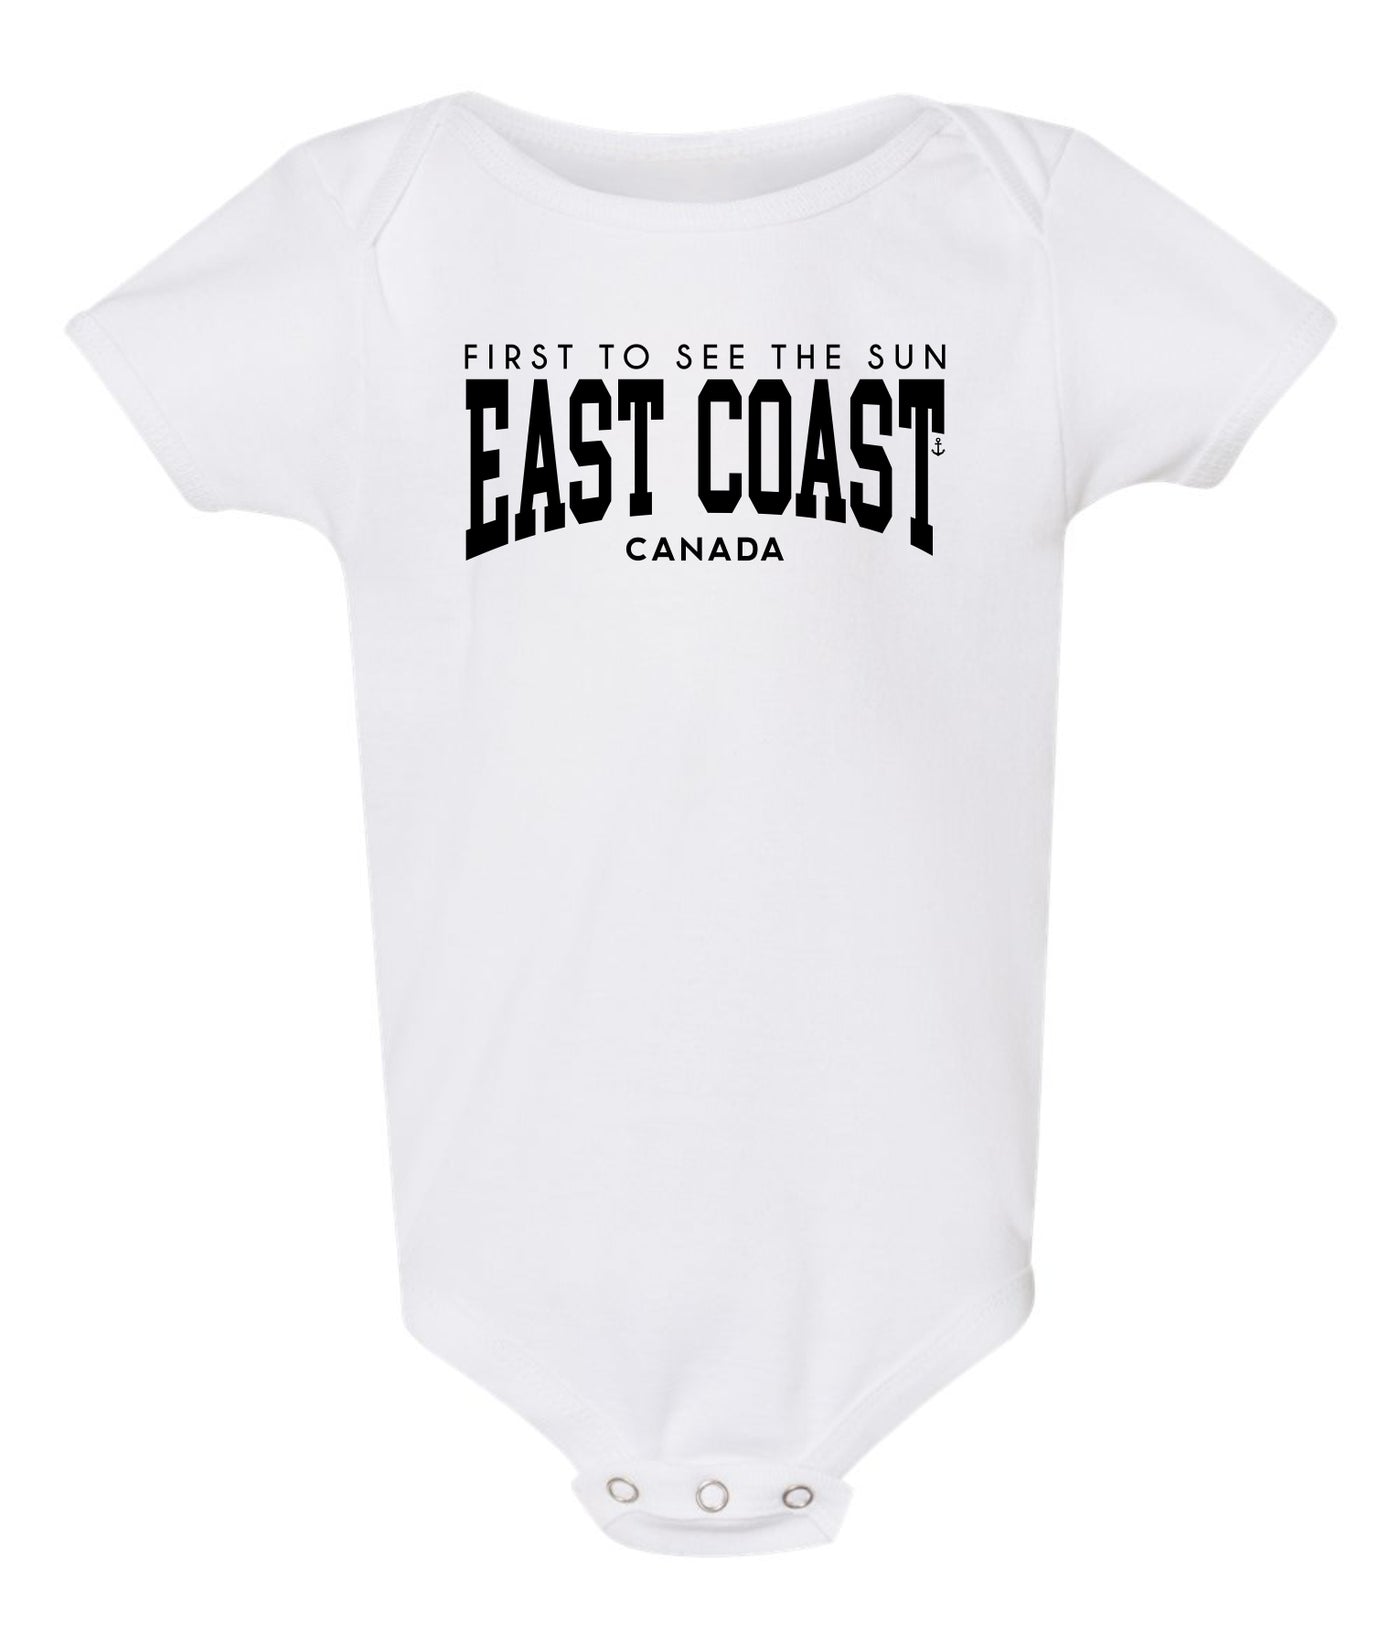 "East Coast - First To See The Sun" Onesie